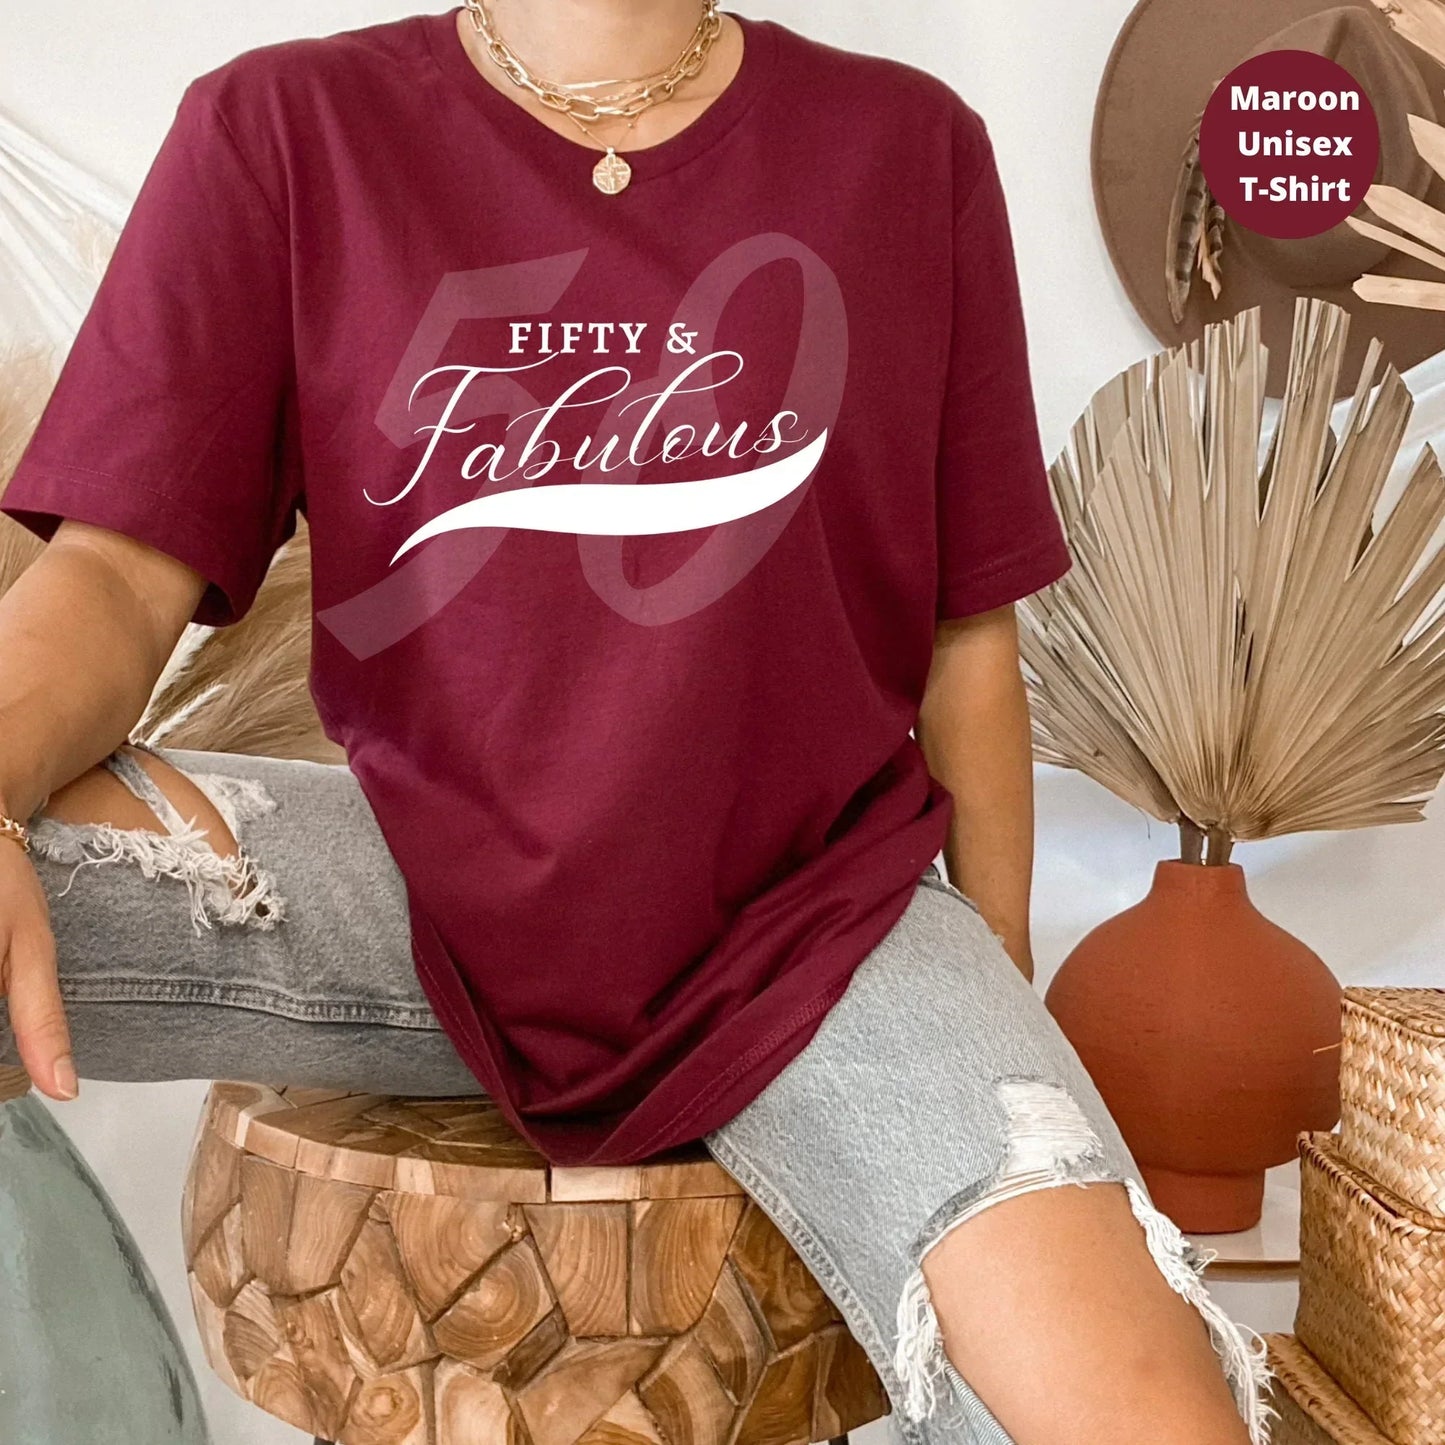 Fifty and Fabulous Shirt, 50th Birthday Shirt - Celebrate Your Milestone in Style!